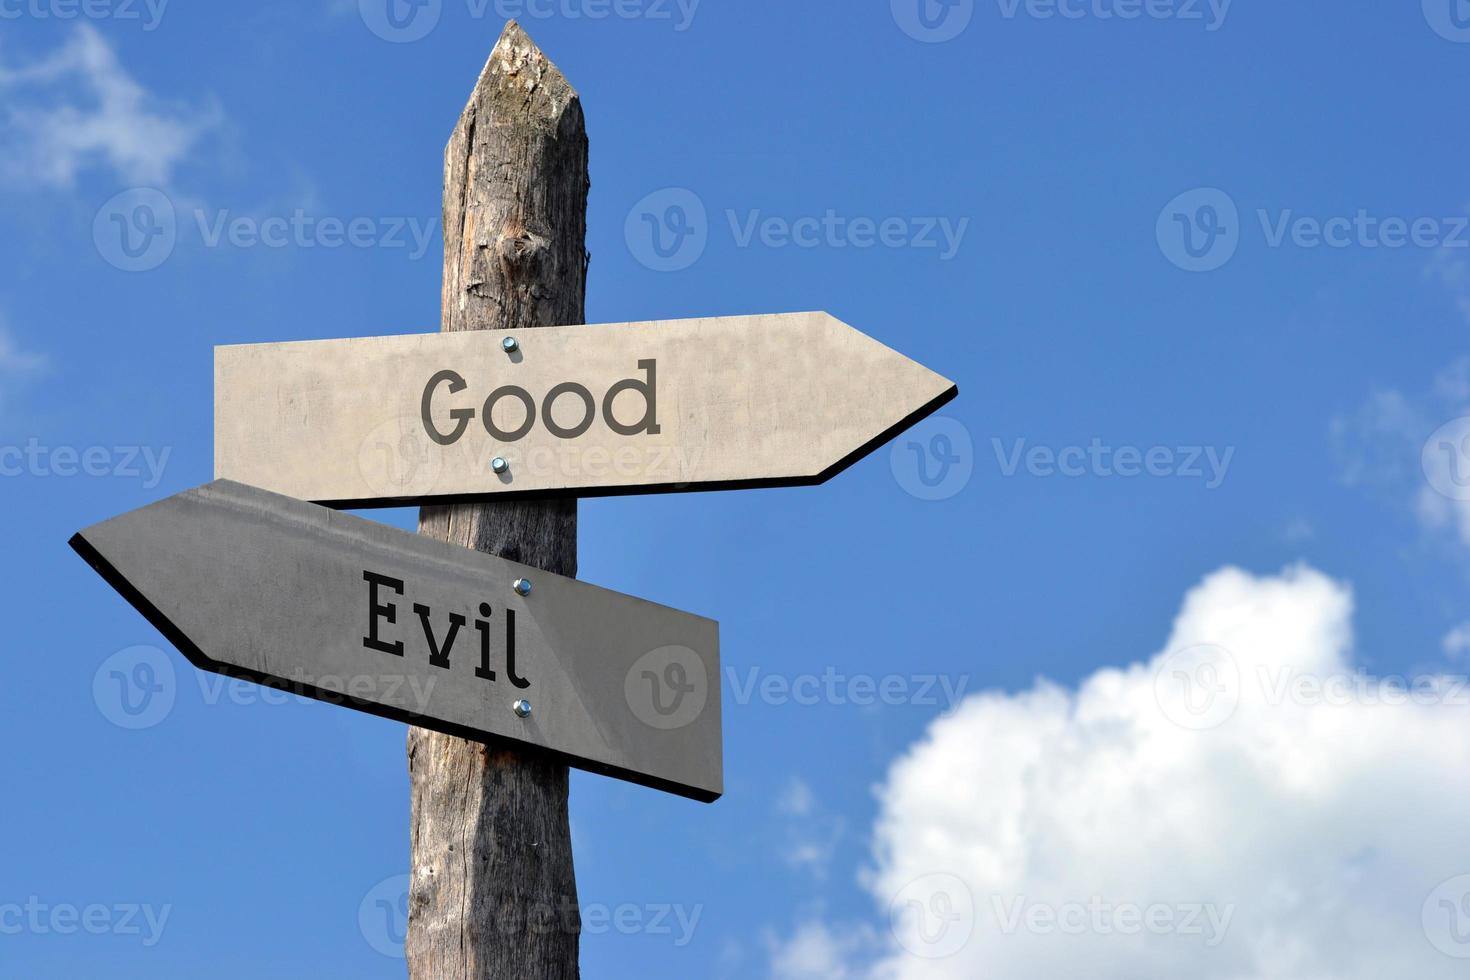 Good and Evil - Wooden Signpost with Two Arrows, Sky with Clouds photo